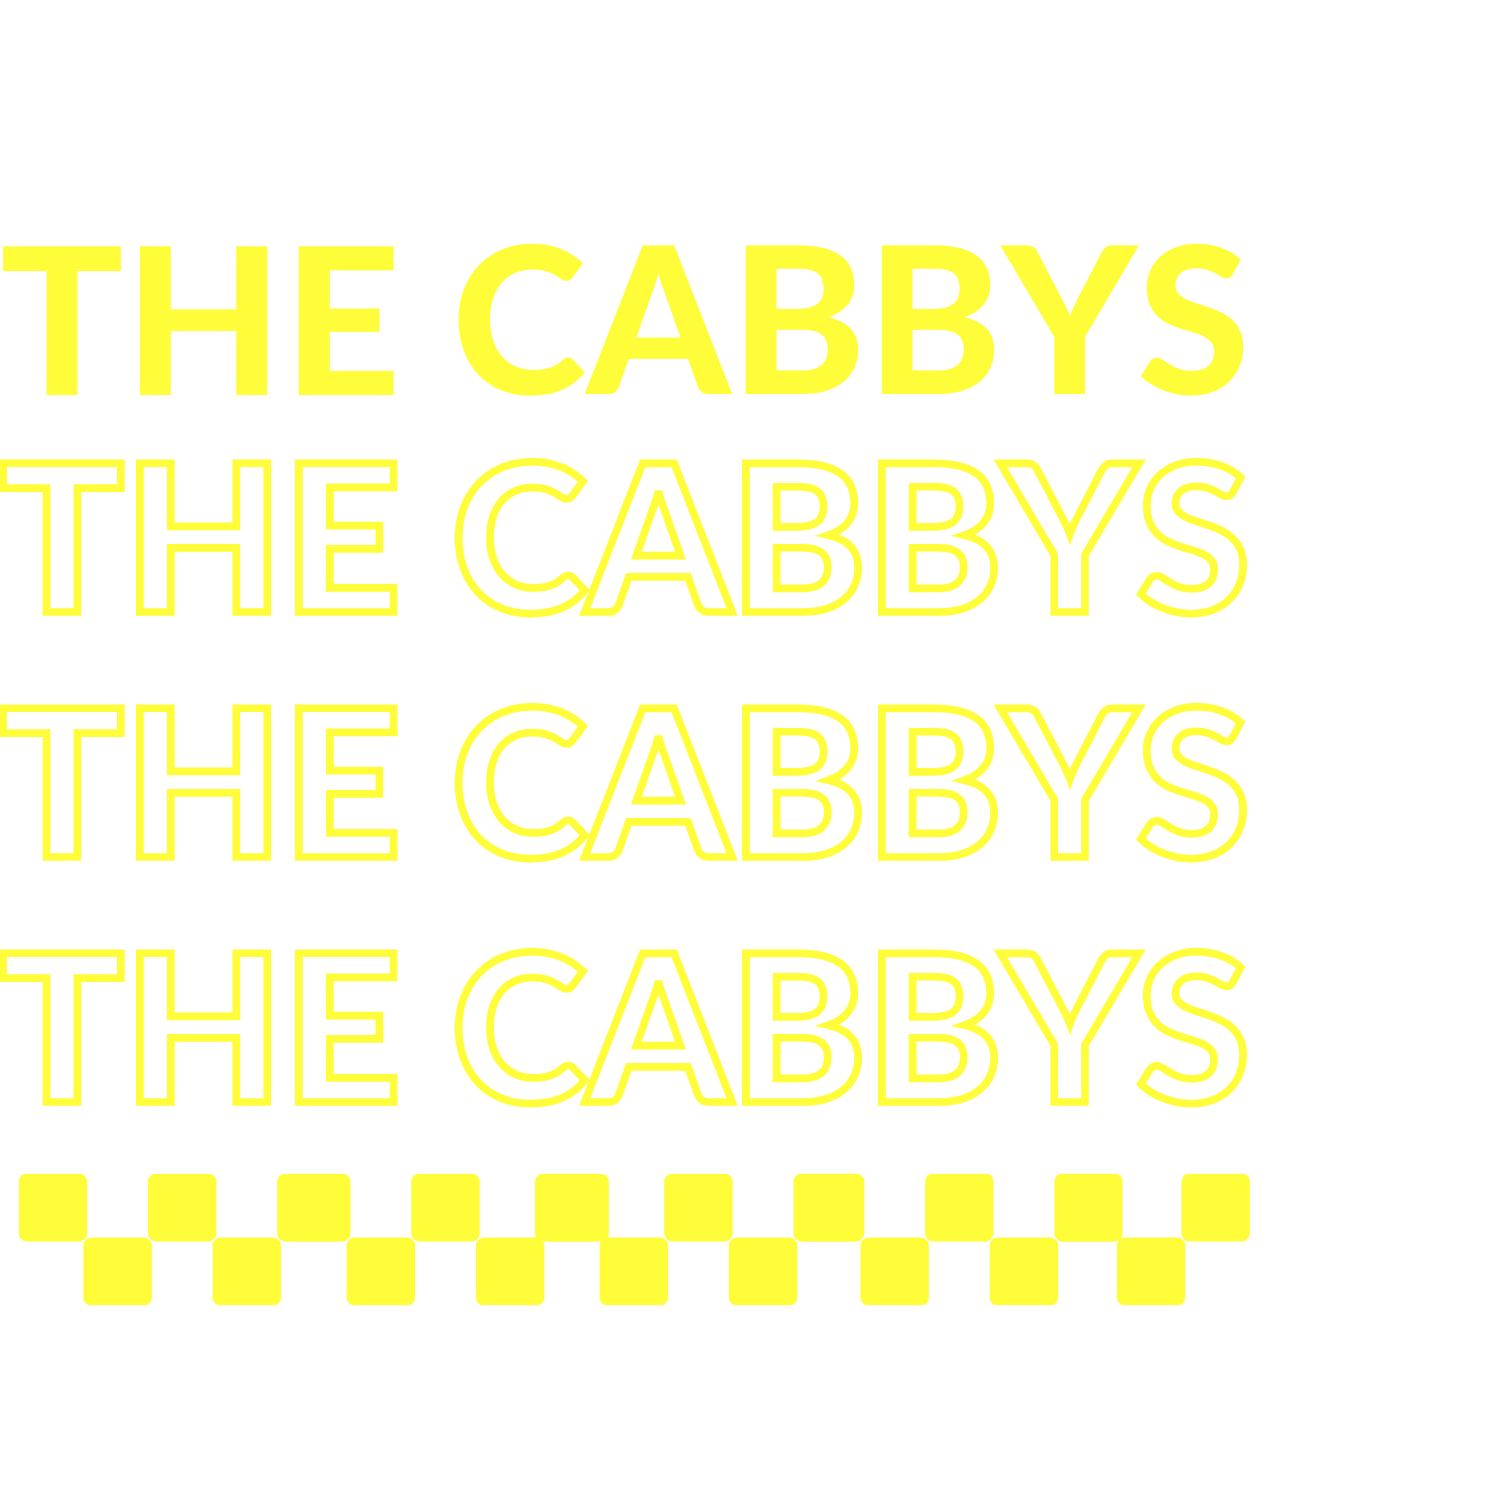 THE CABBYS